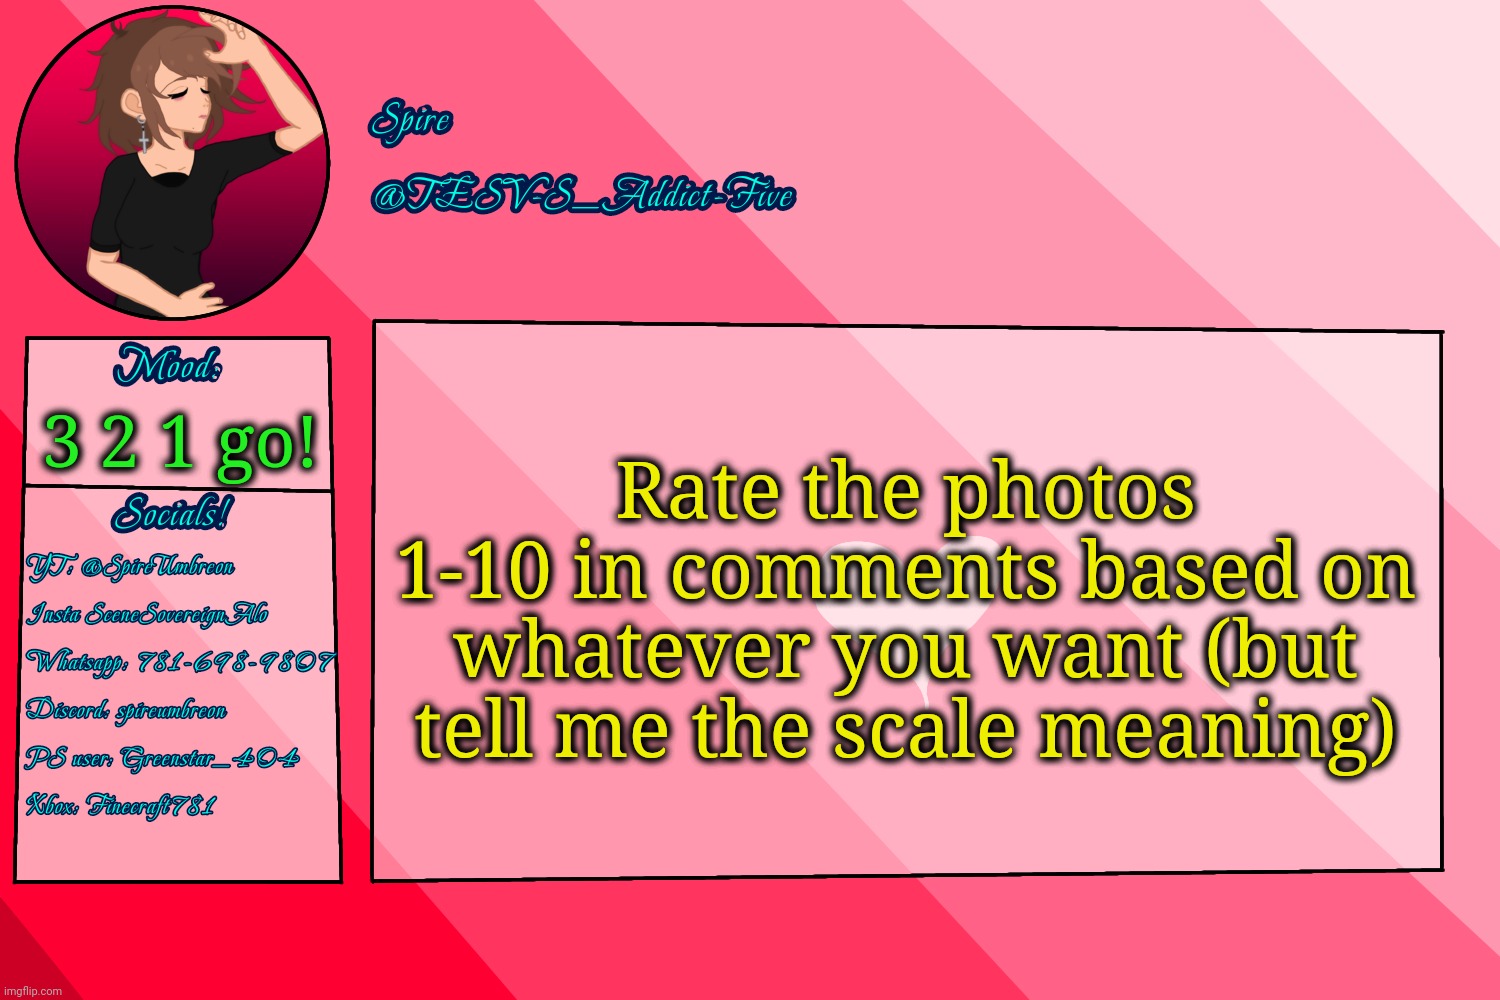 I'm bored | Rate the photos 1-10 in comments based on whatever you want (but tell me the scale meaning); 3 2 1 go! | image tagged in tesv-s_addict-five announcement template | made w/ Imgflip meme maker